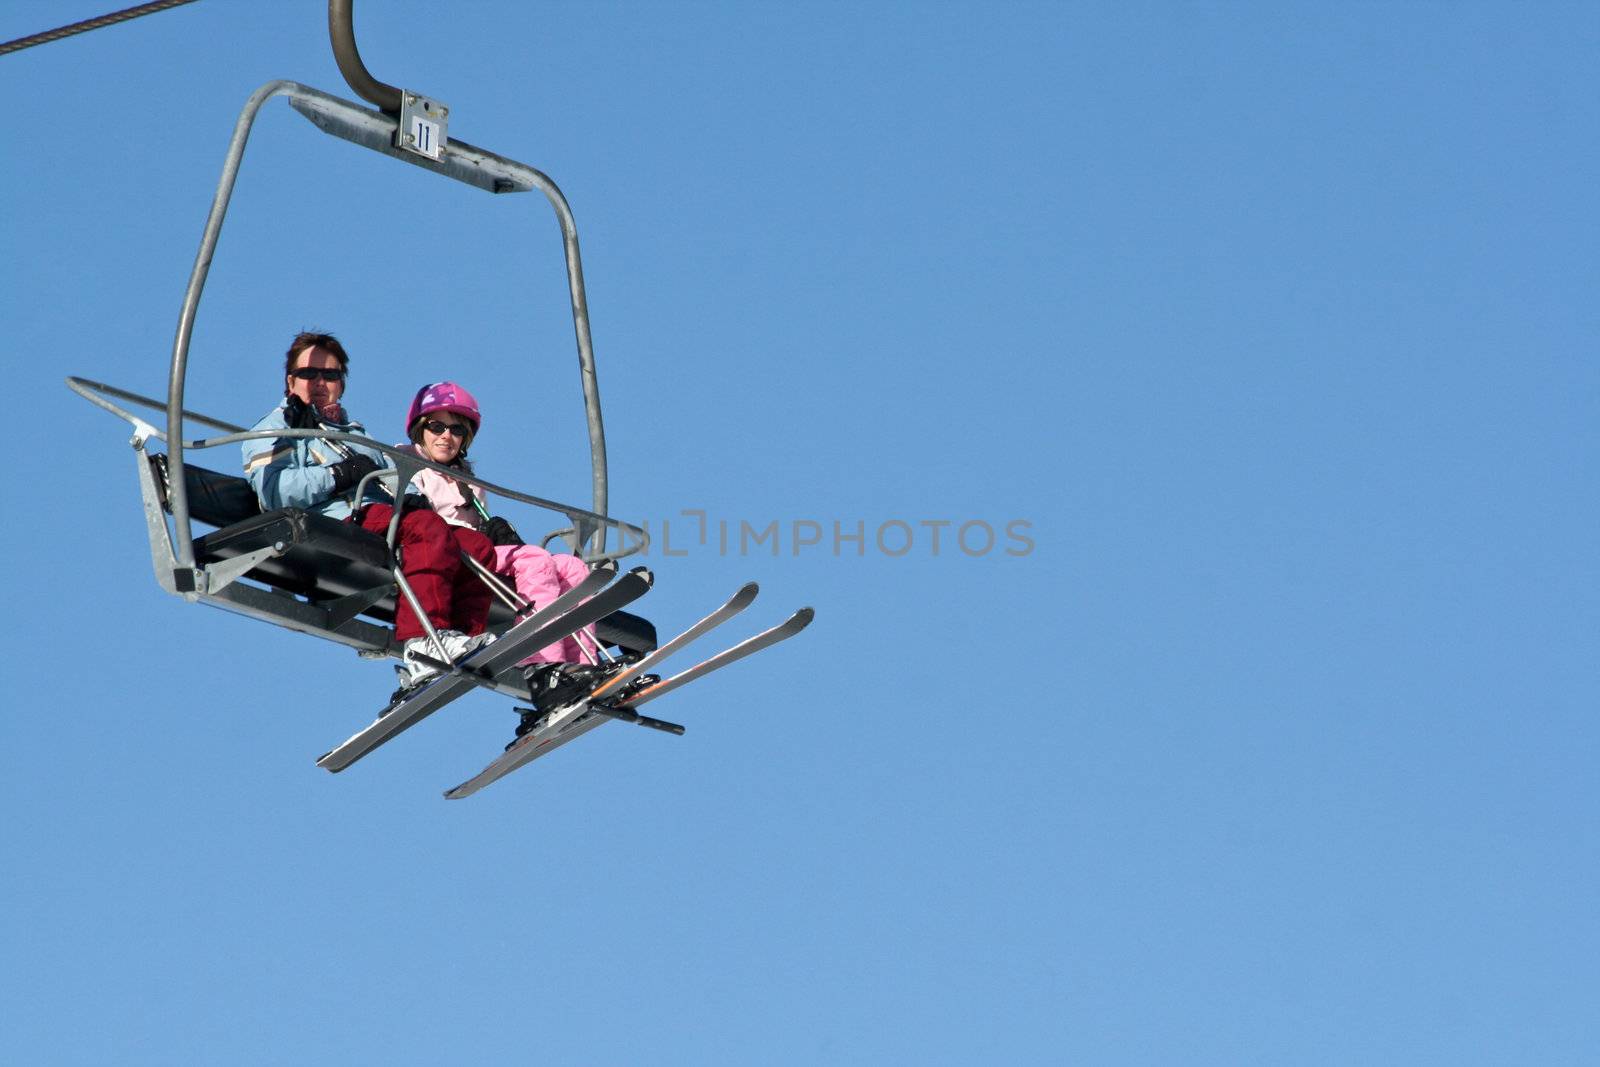 Two women riding the Ski lift. by groomee